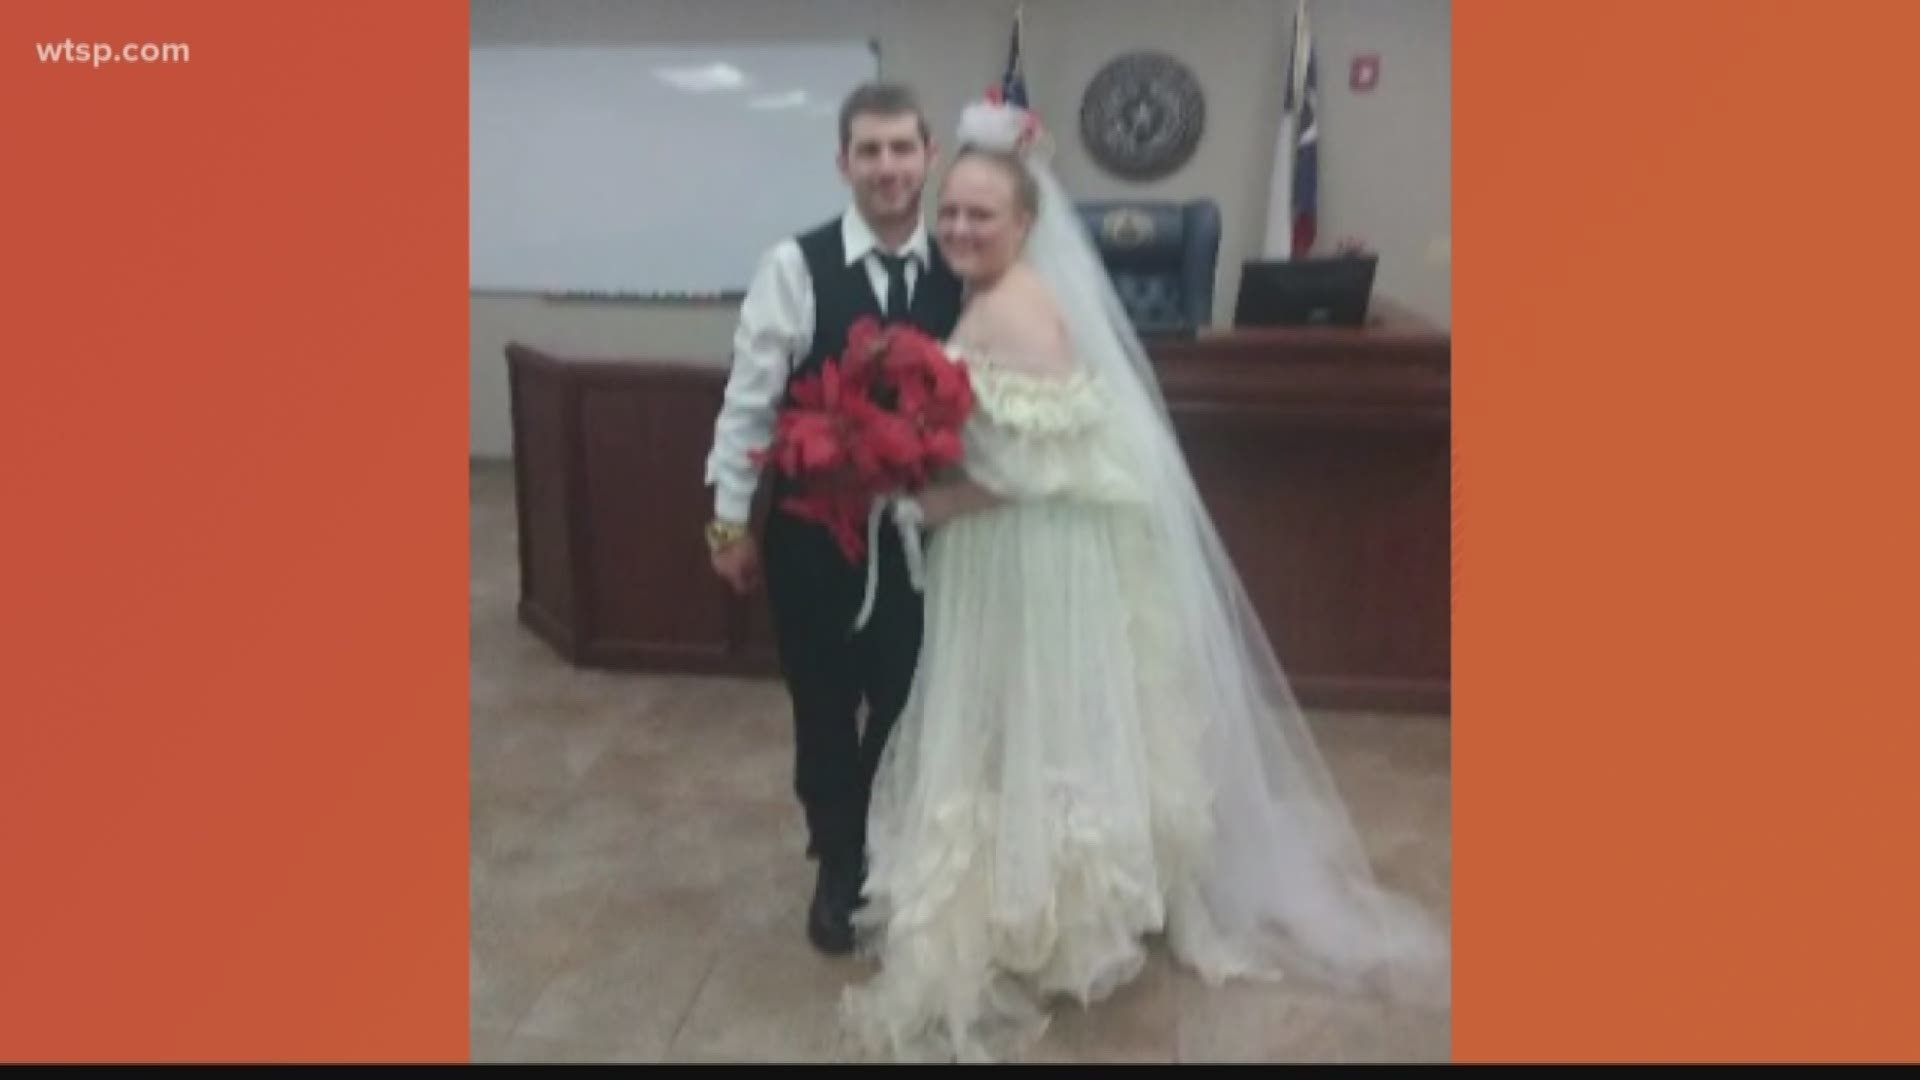 A newlywed couple was killed in a crash minutes after tying the knot in Orange County.

The accident happened across from the Orange County Airport on Highway 87 around 3 p.m. Friday. Police tell 12News Harley Morgan, 19, and Rhiannon Boudreaux, 20, were both killed. 

Family members say the couple's car was hit by a truck when they were leaving the parking lot of the Justice of the Peace following their nuptials.